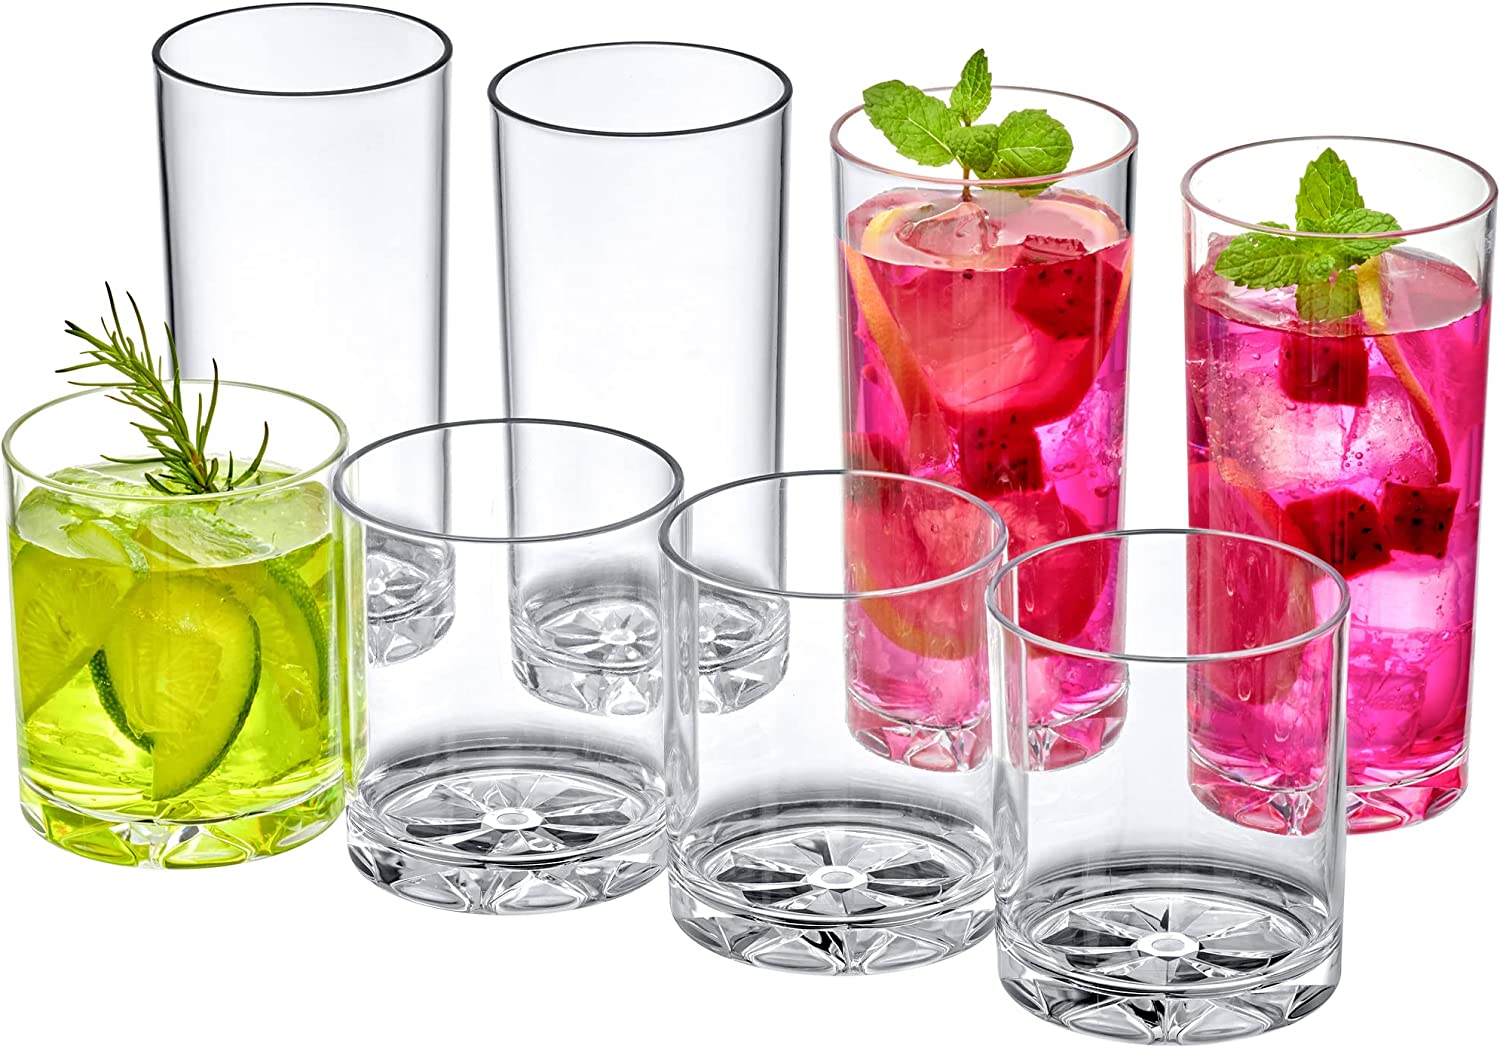 Amazing Abby - Polka Dot - 24-Ounce Plastic Tumblers (Set of 8), Plastic  Drinking Glasses, Mixed-Col…See more Amazing Abby - Polka Dot - 24-Ounce